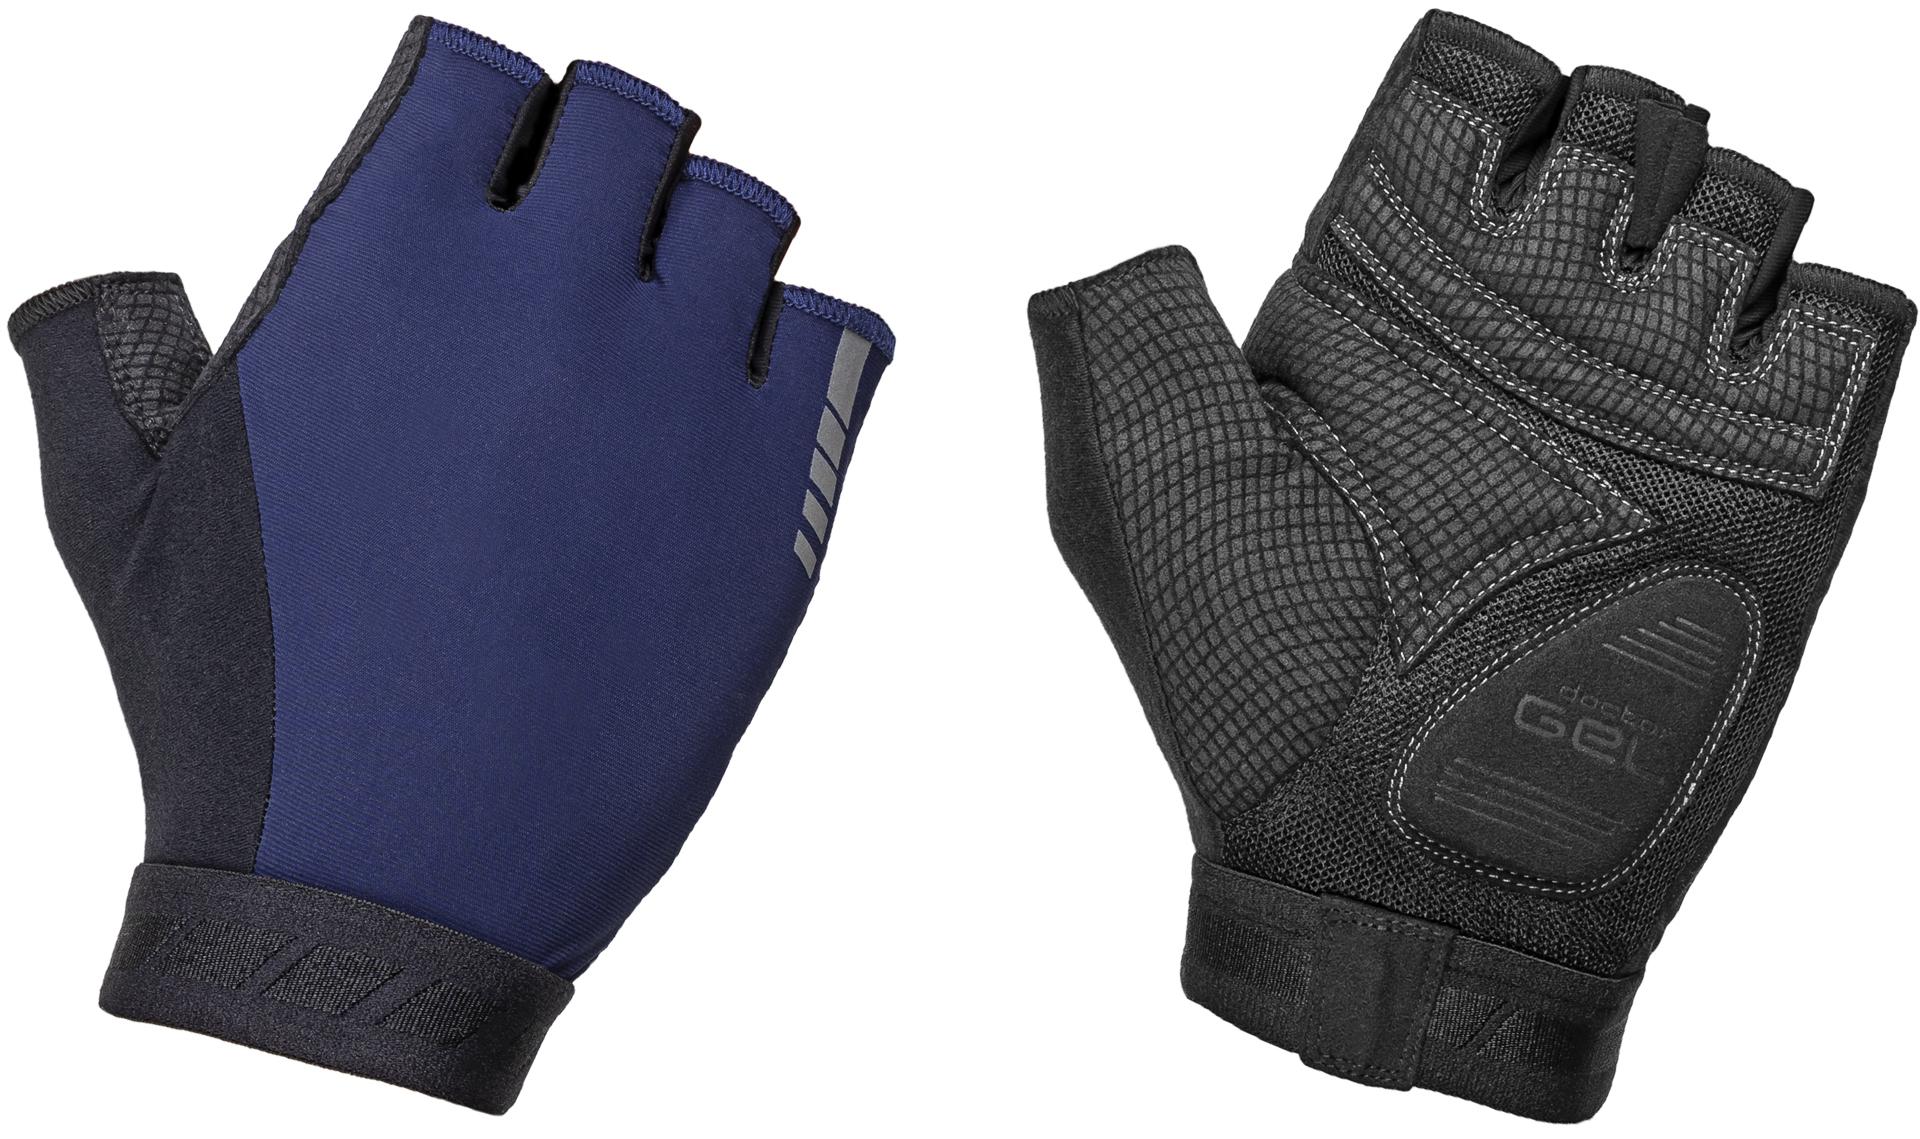 Gripgrab Worldcup Short Finger Padded Cycling Gloves - Navy Blue